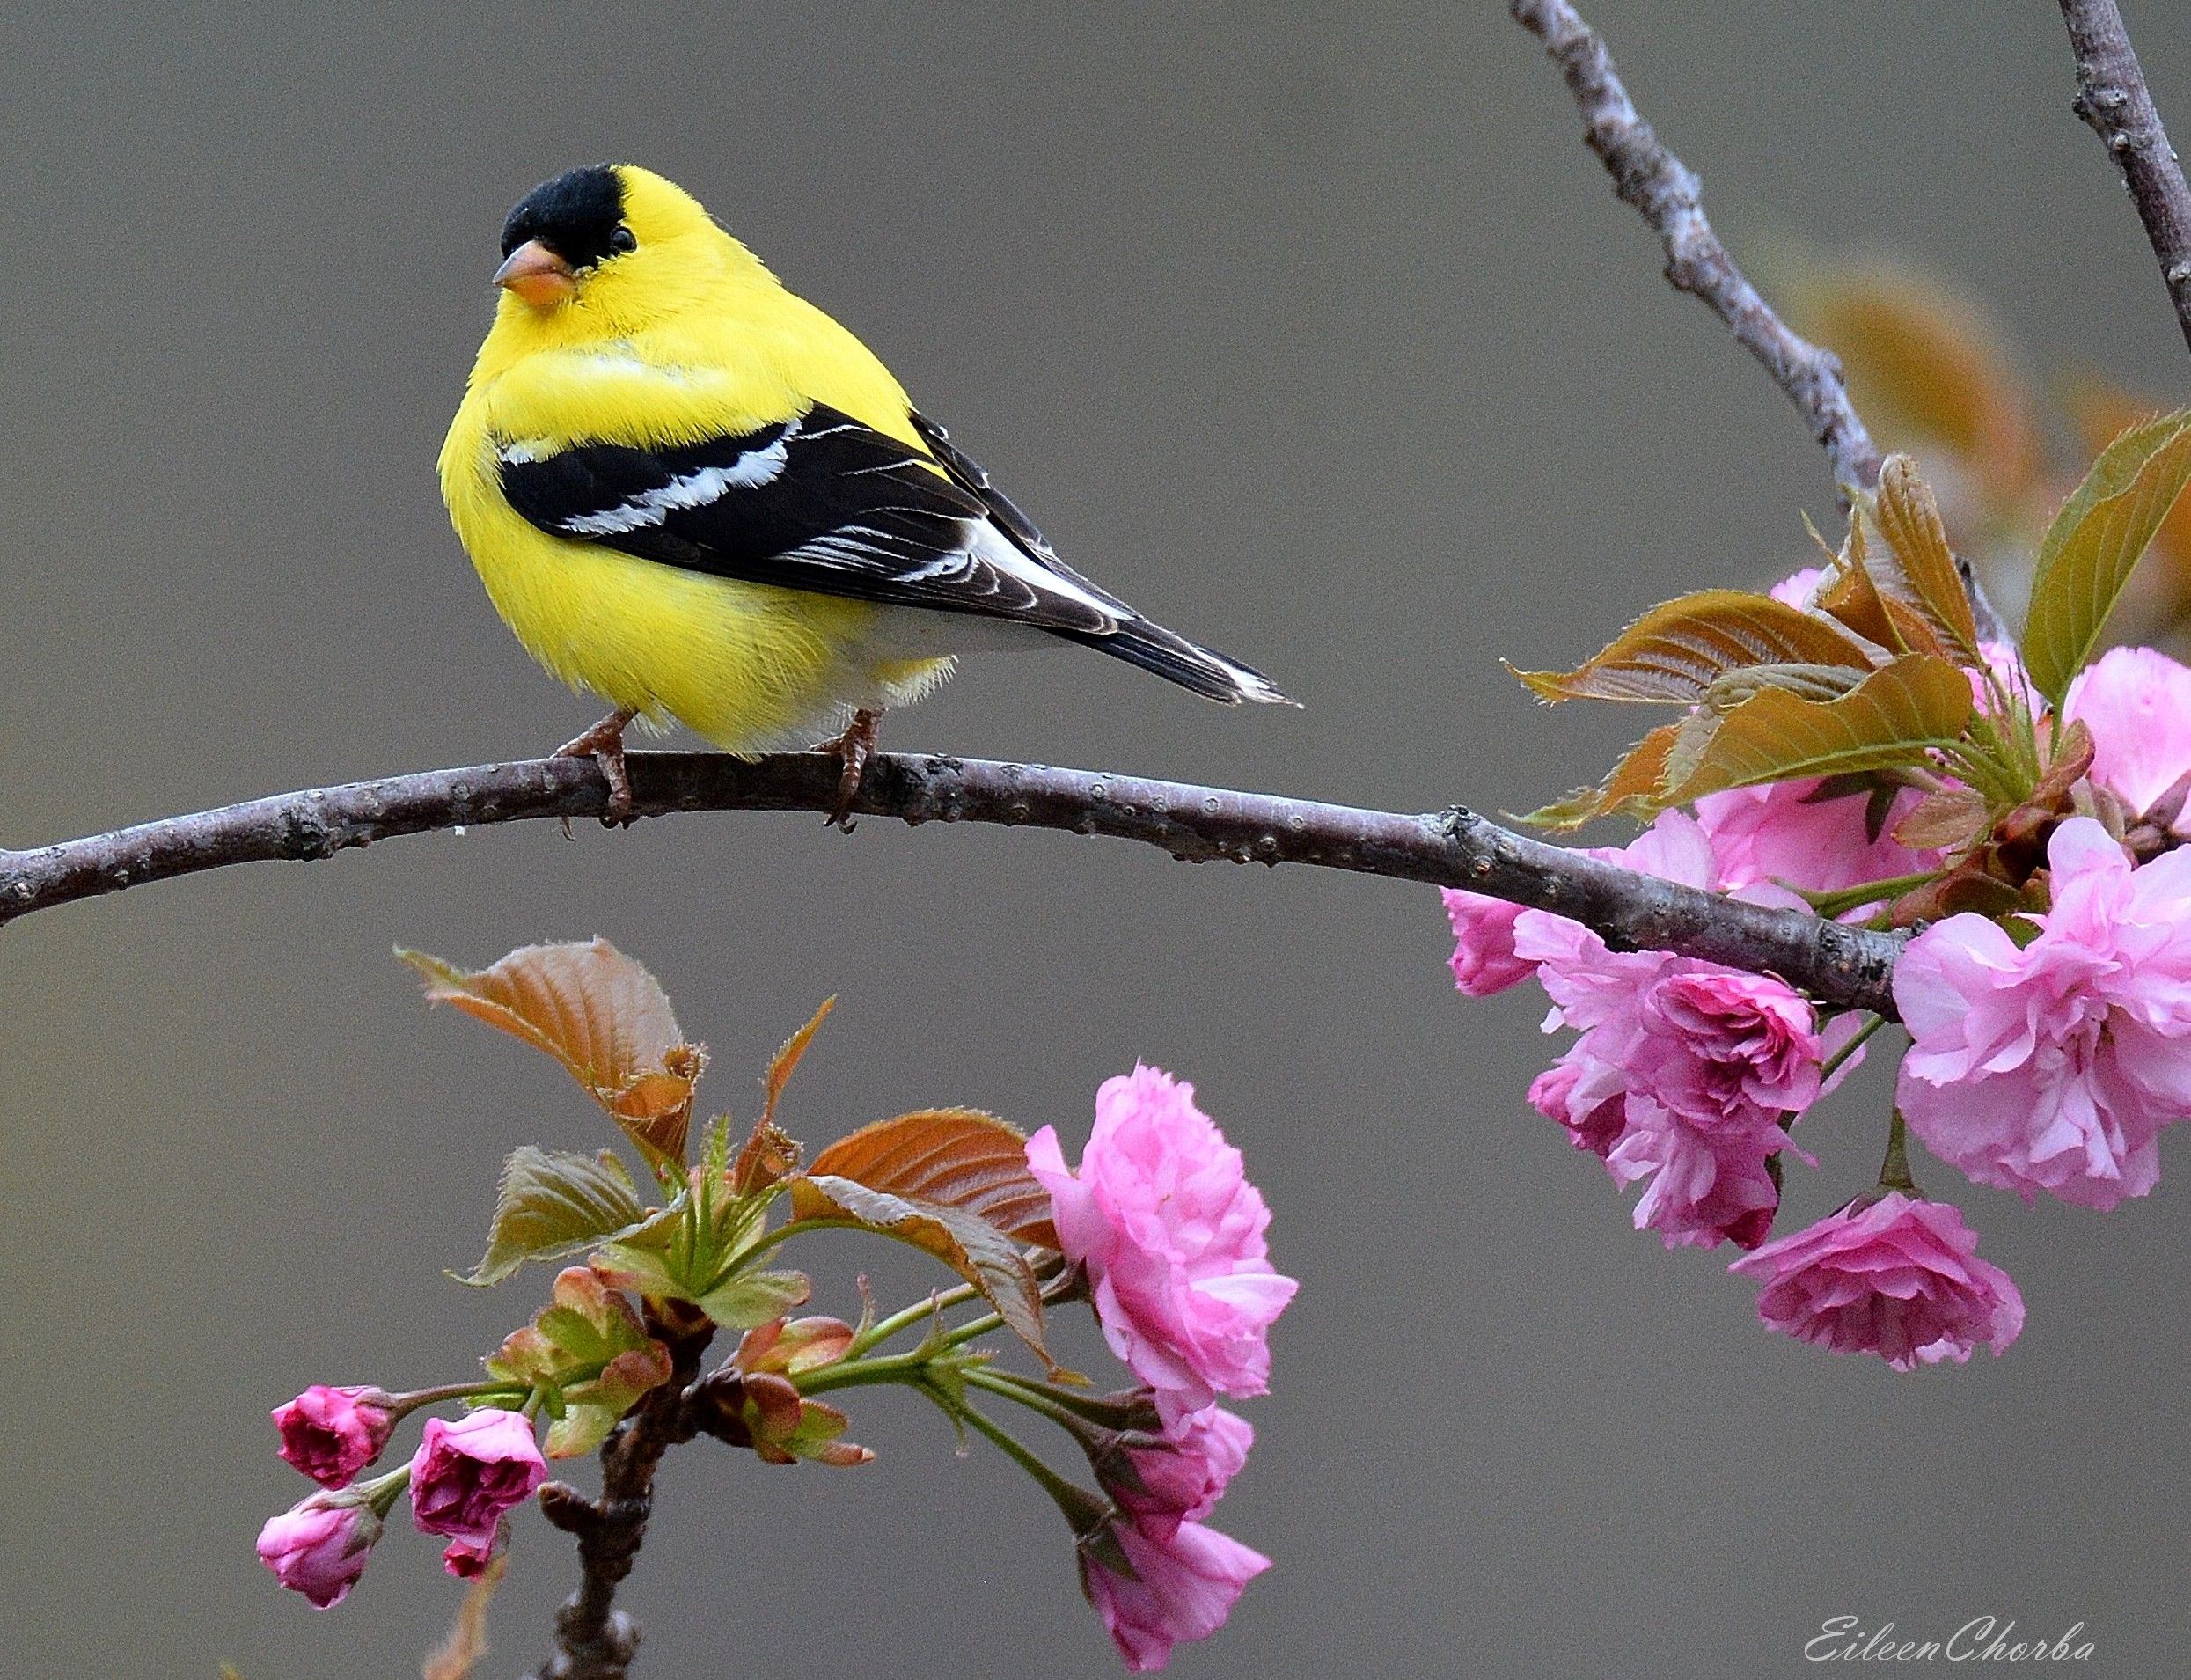 American Goldfinch perched on a blooming cherry tree branch